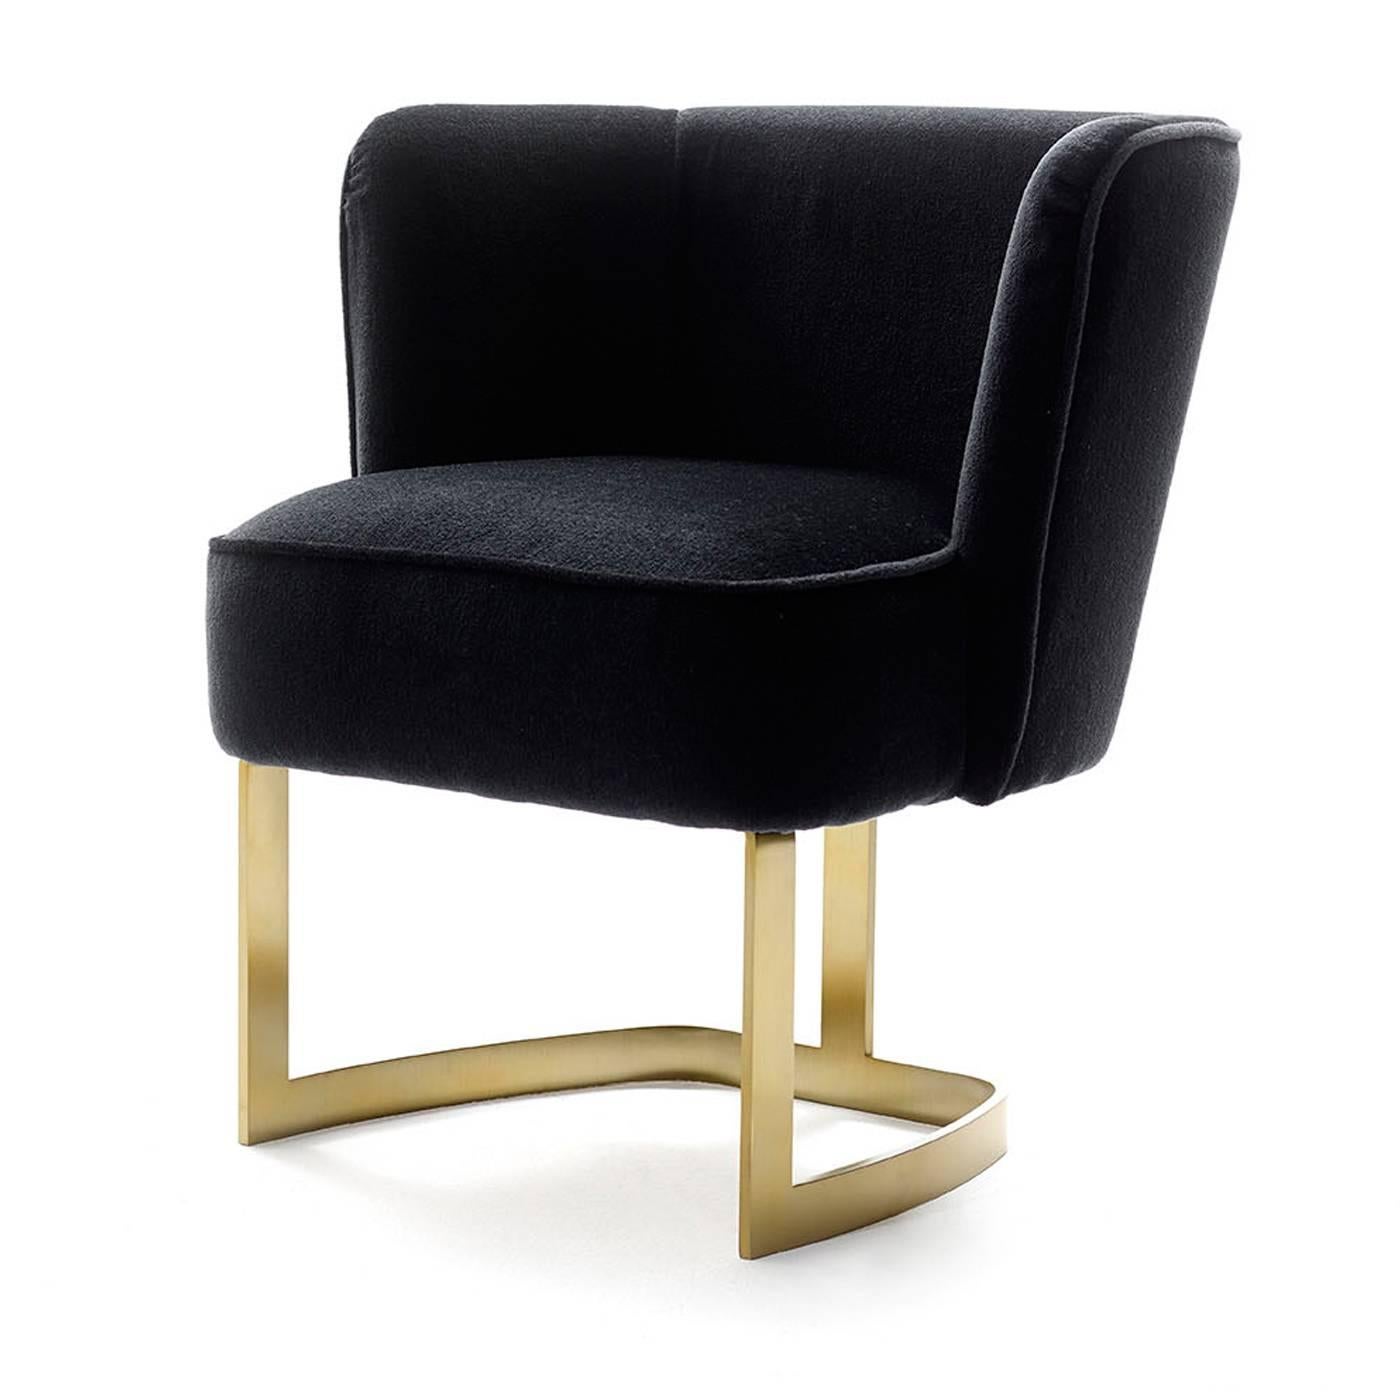 This luxurious seat is mounted on a brass frame with a horseshoe design and features polyurethane padding upholstered with fine black velvet. Designed by Studio 63.